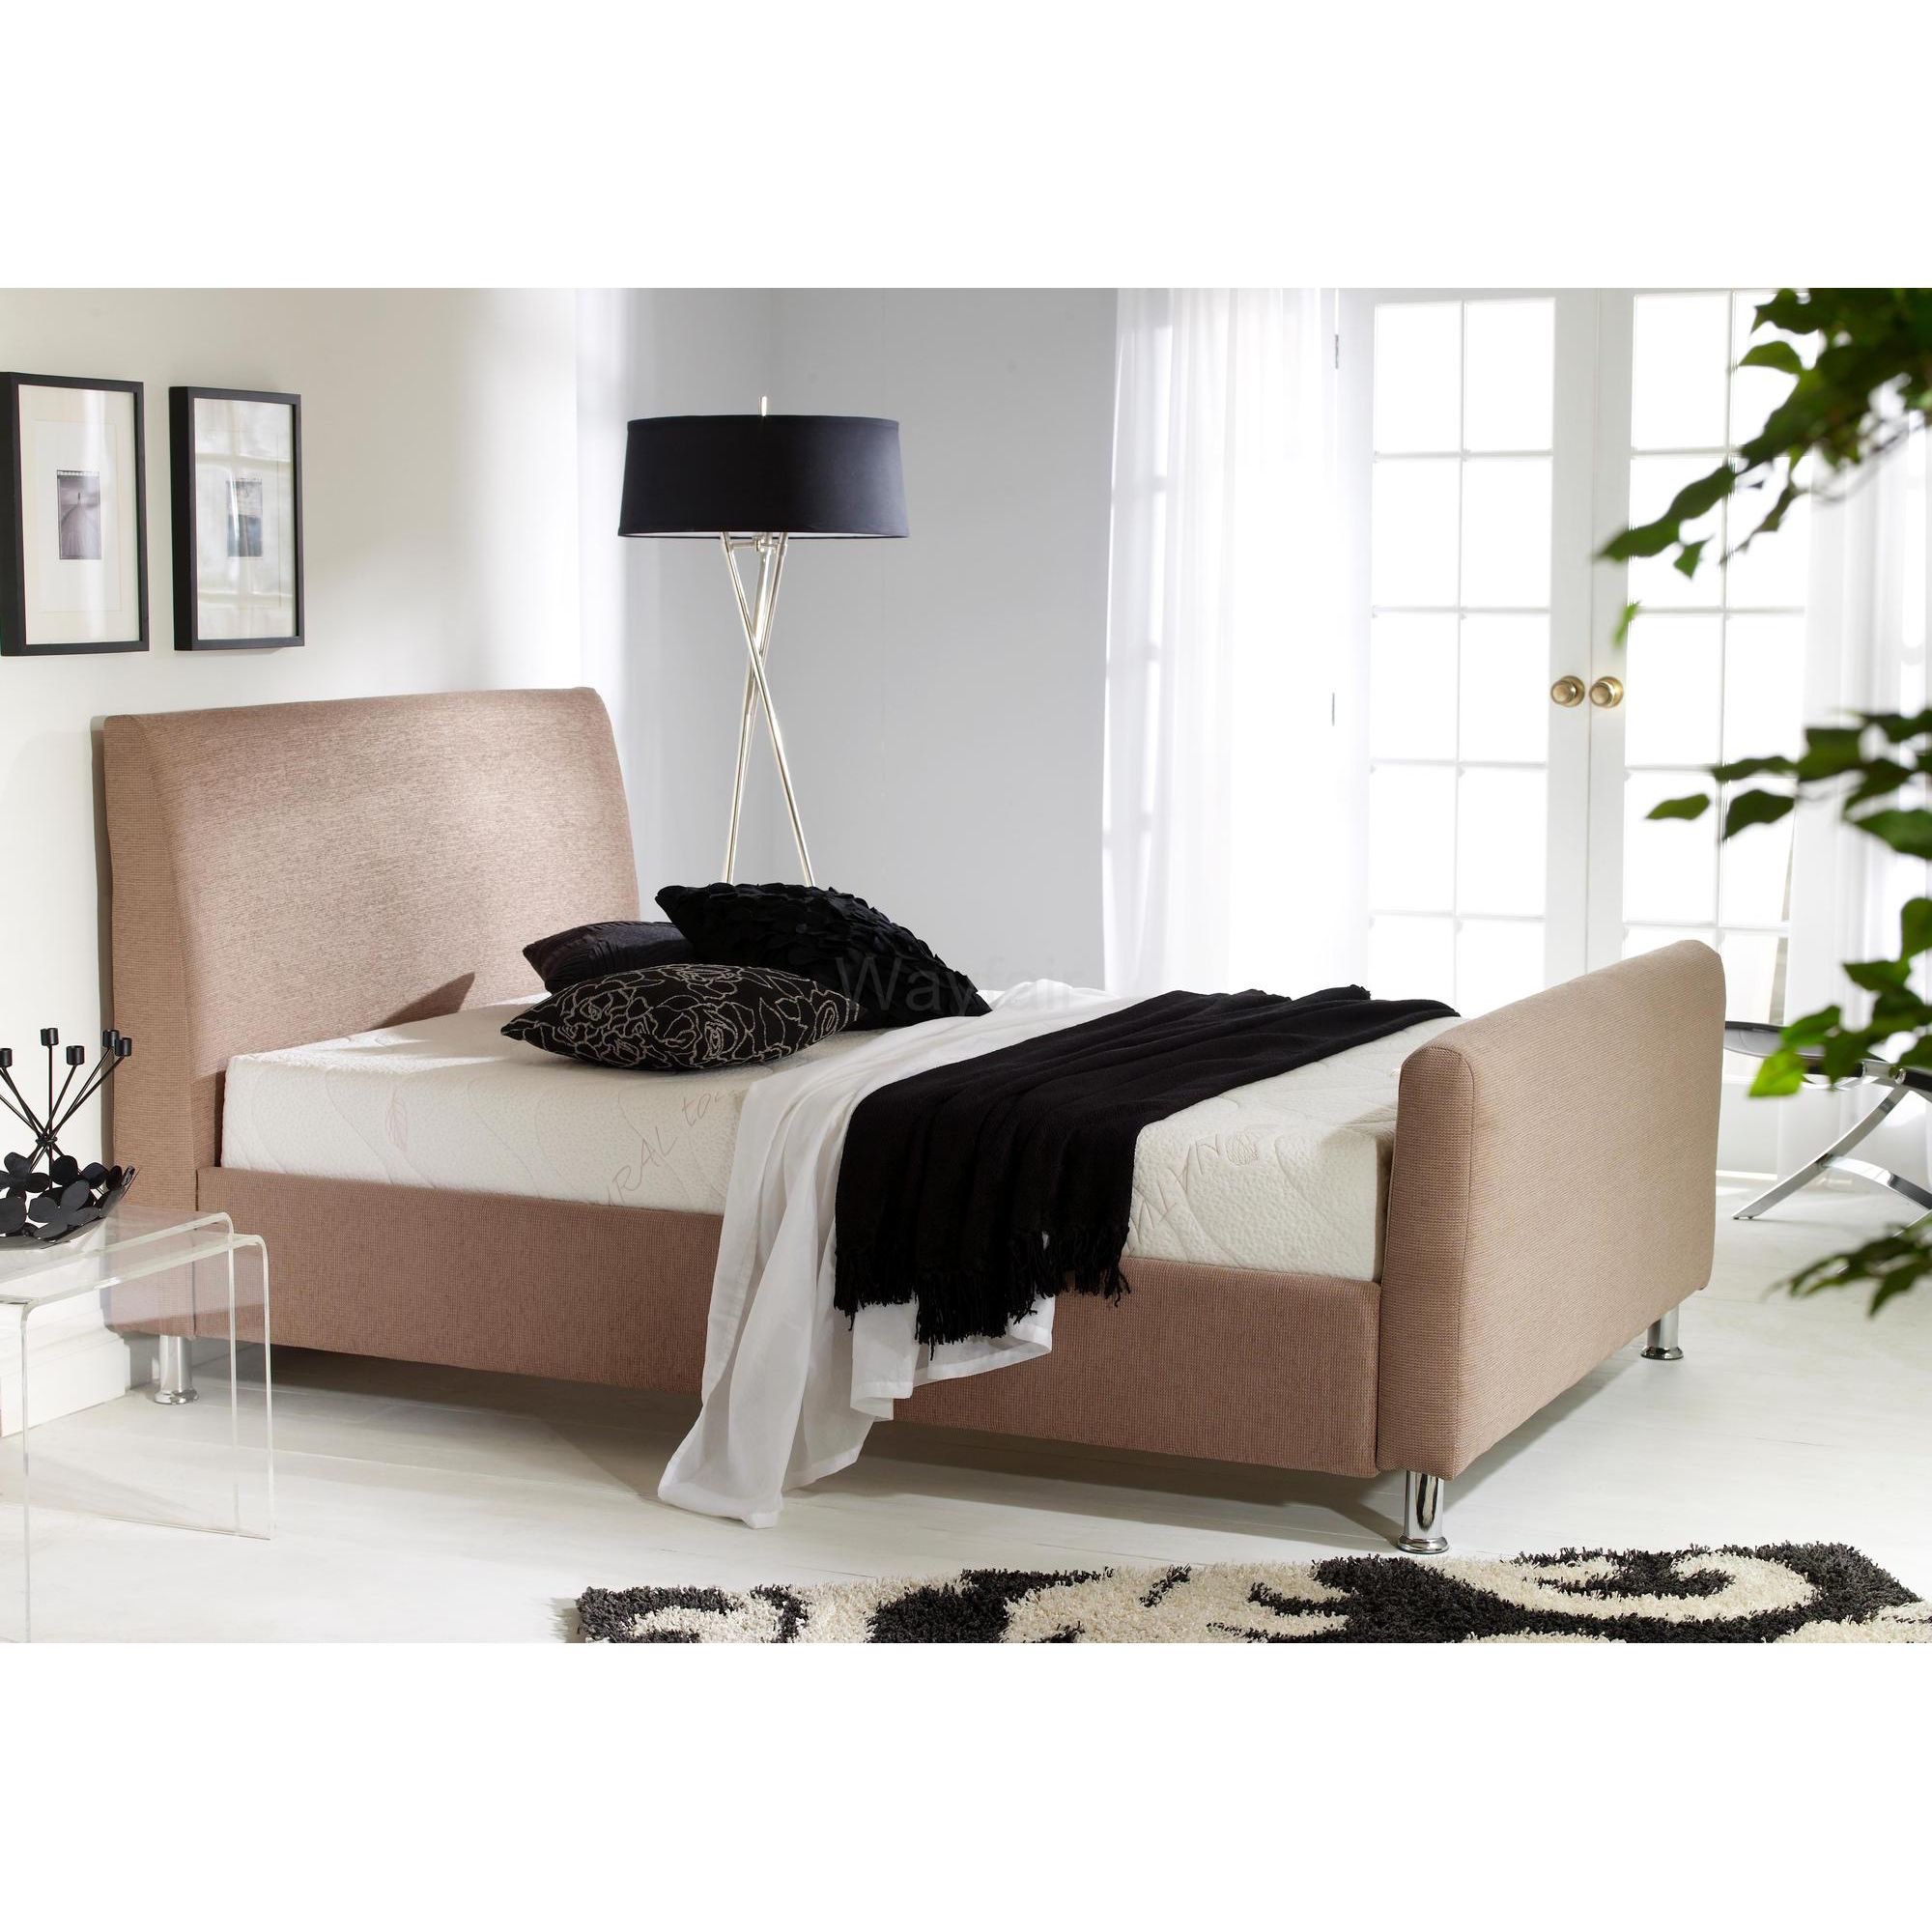 MA Living Kamli Bed - Double - faux leather Black at Tesco Direct